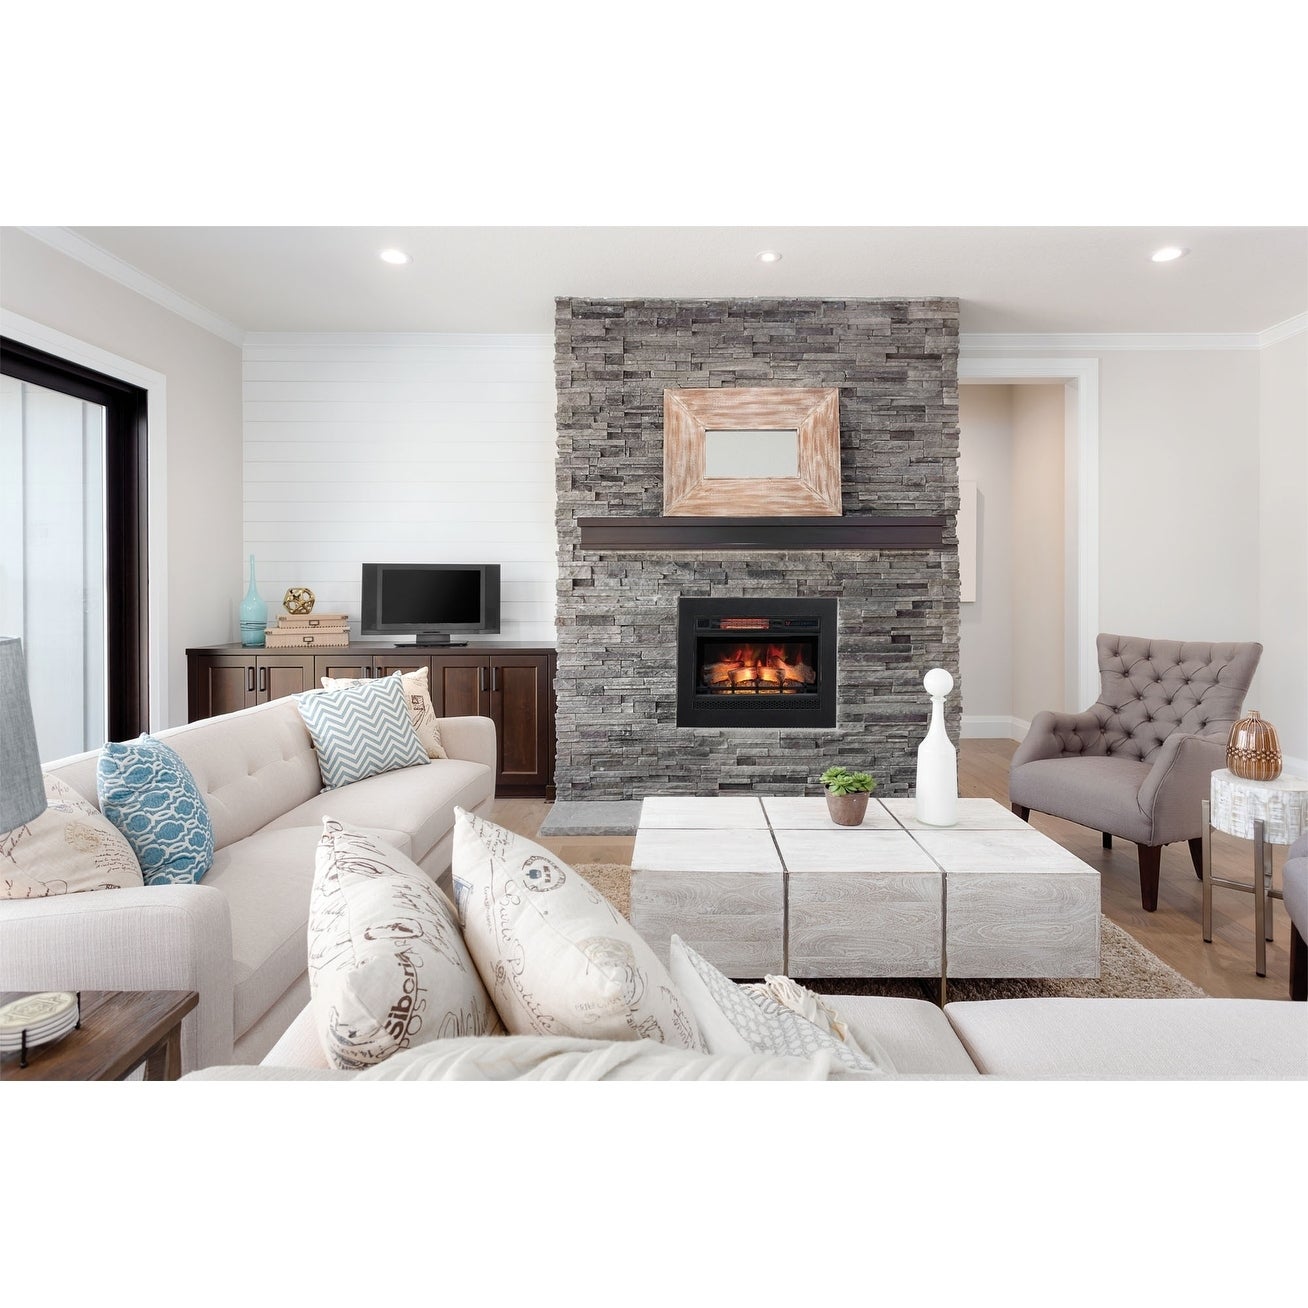 How to Install Electric Fireplace Inspirational Classicflame 26" 3d Infrared Quartz Electric Fireplace Insert